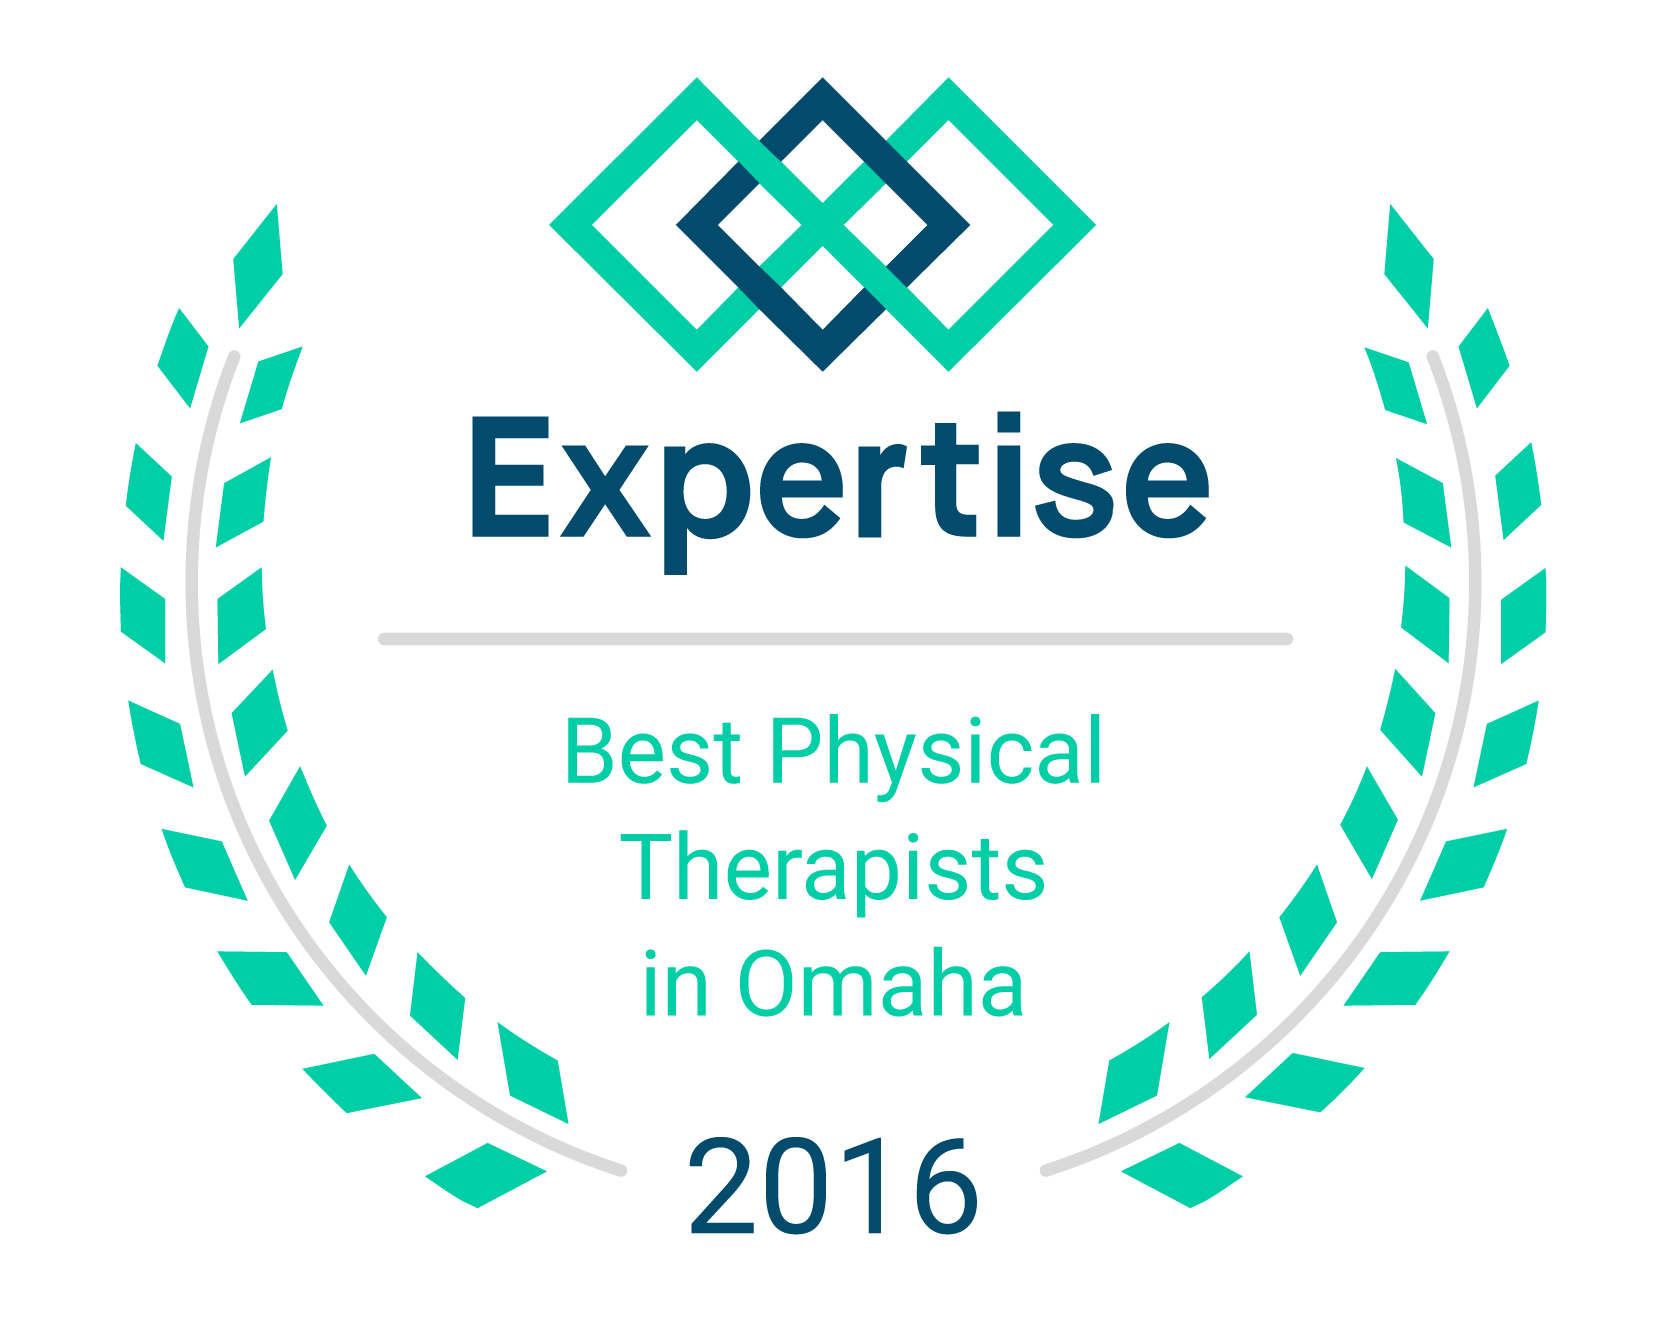 Best Physical
Therapists in Omaha